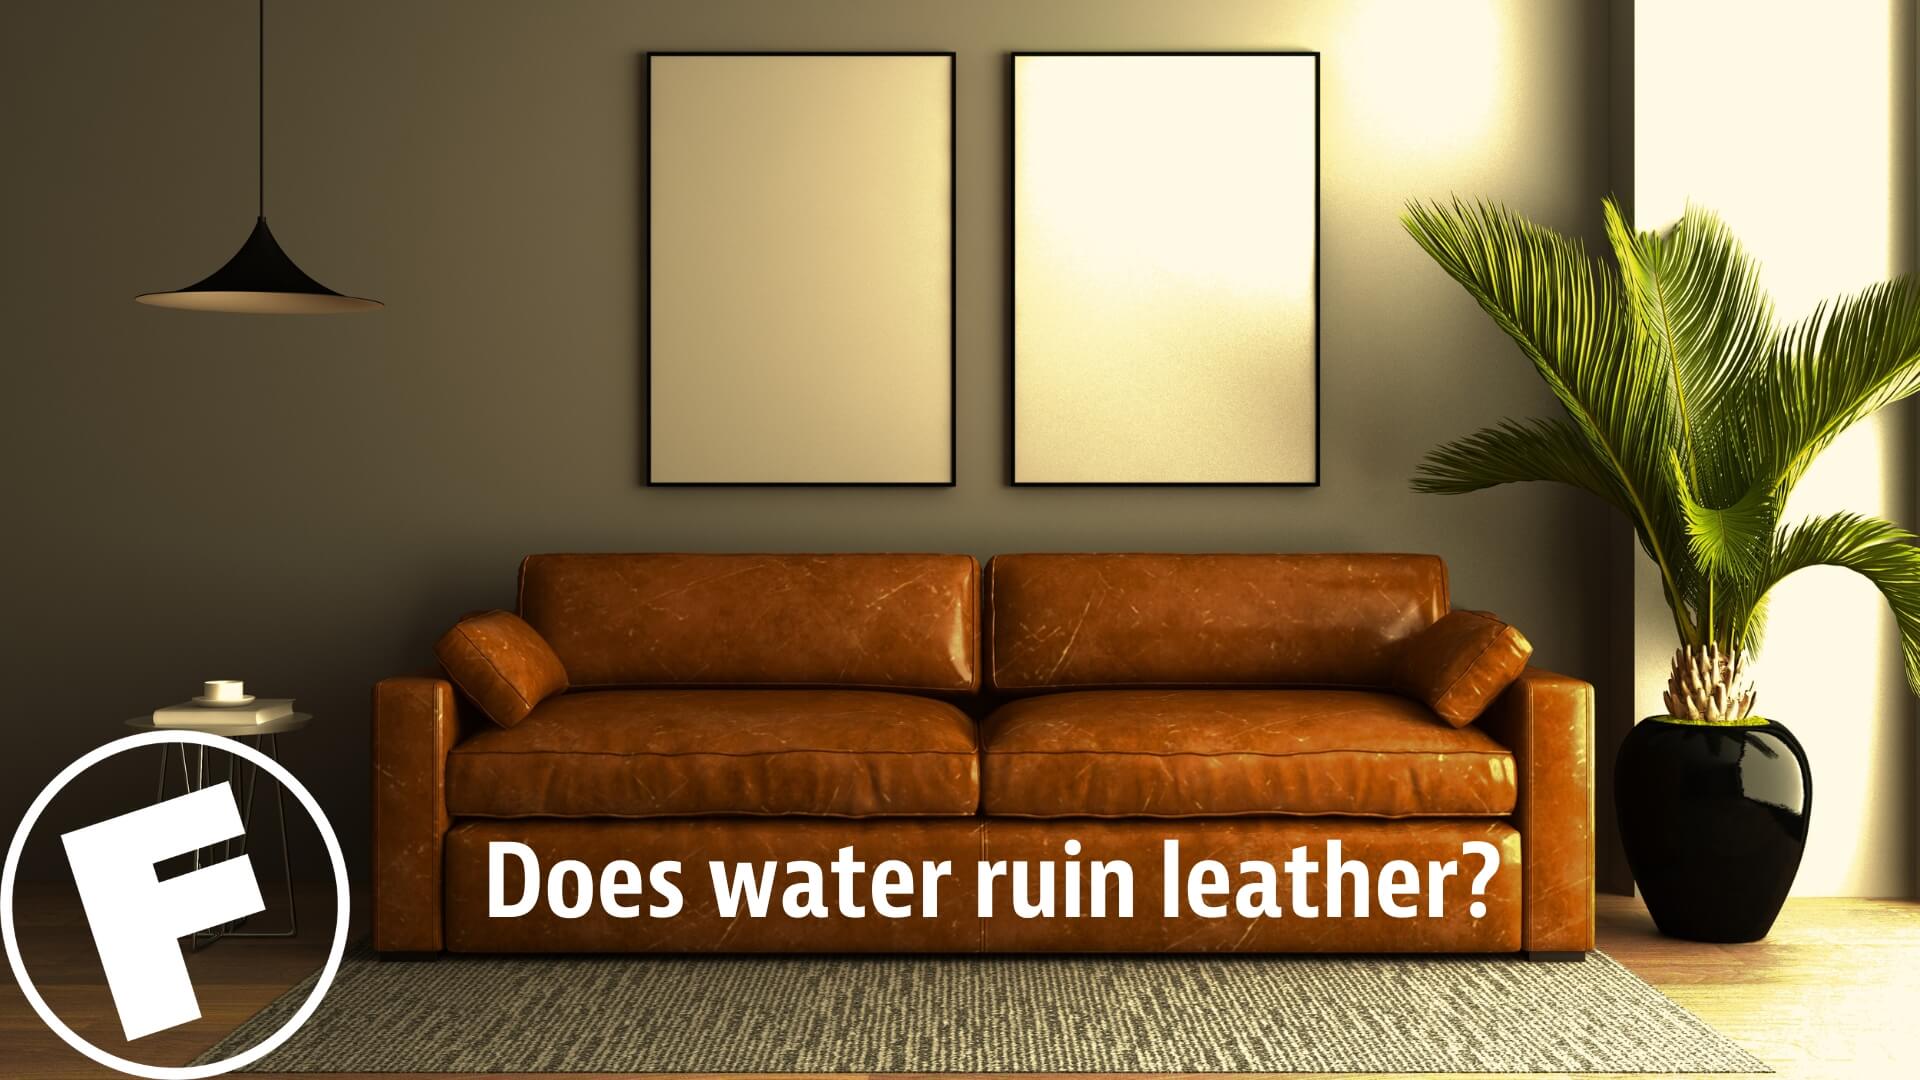 Here Are the Dos and Don'ts of Leather - Better Sofas